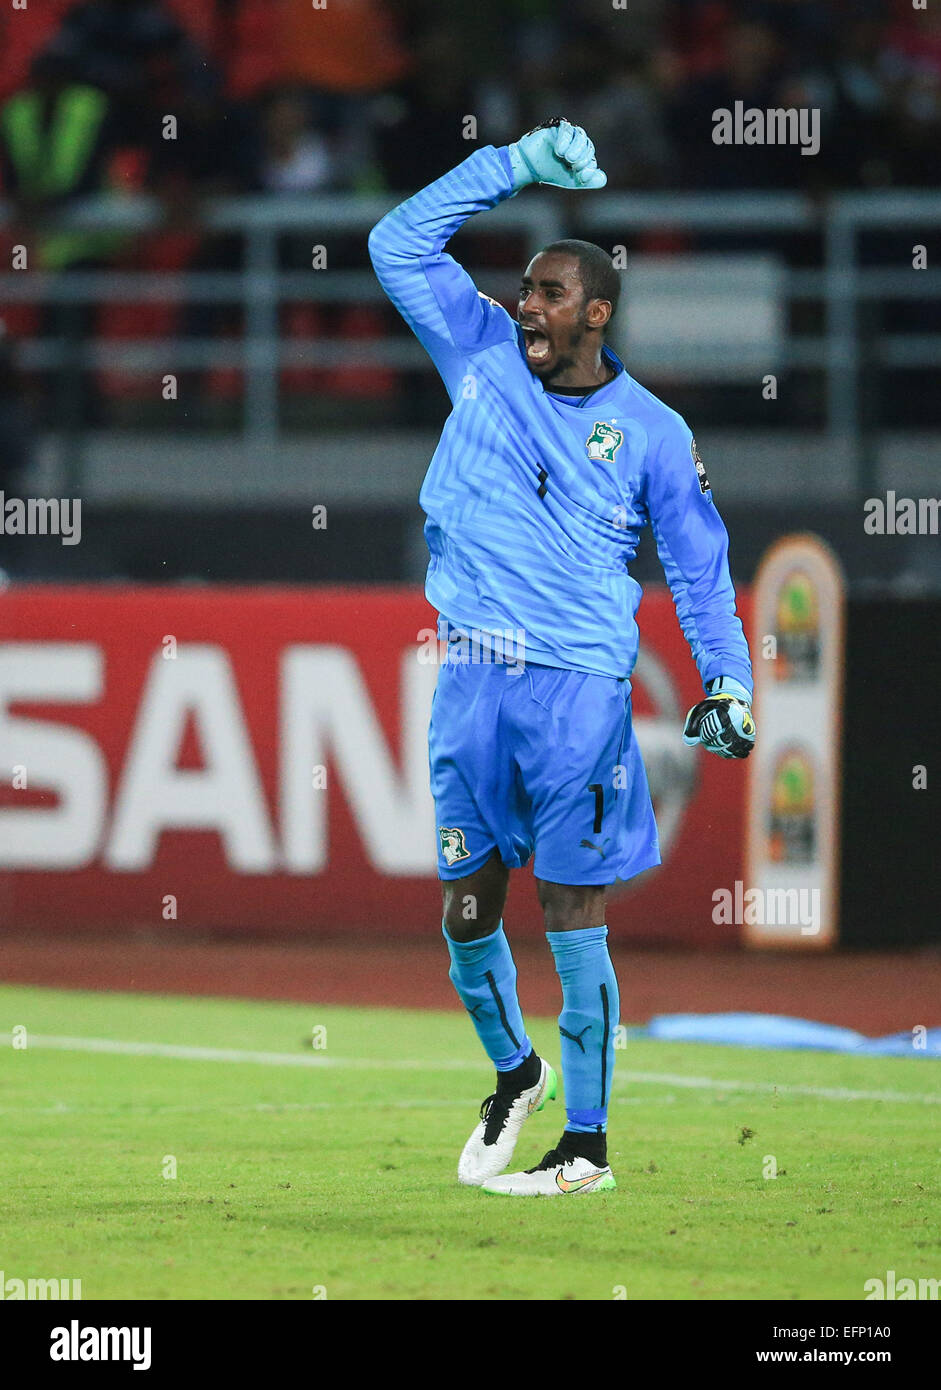 Bata, Equatorial Guinea. 8th Feb, 2015. Boubacar Barry, goalkeeper of Cote d'Ivoire, reacts during the penalty kicks of the final match of Africa Cup of Nations between Ghana and Cote d'Ivoire in Bata, Equatorial Guinea, Feb. 8, 2015. Cote d'Ivoire defeated Ghana by 9-8 after the extra time and penalty kicks and claimed the title. Credit:  Meng Chenguang/Xinhua/Alamy Live News Stock Photo